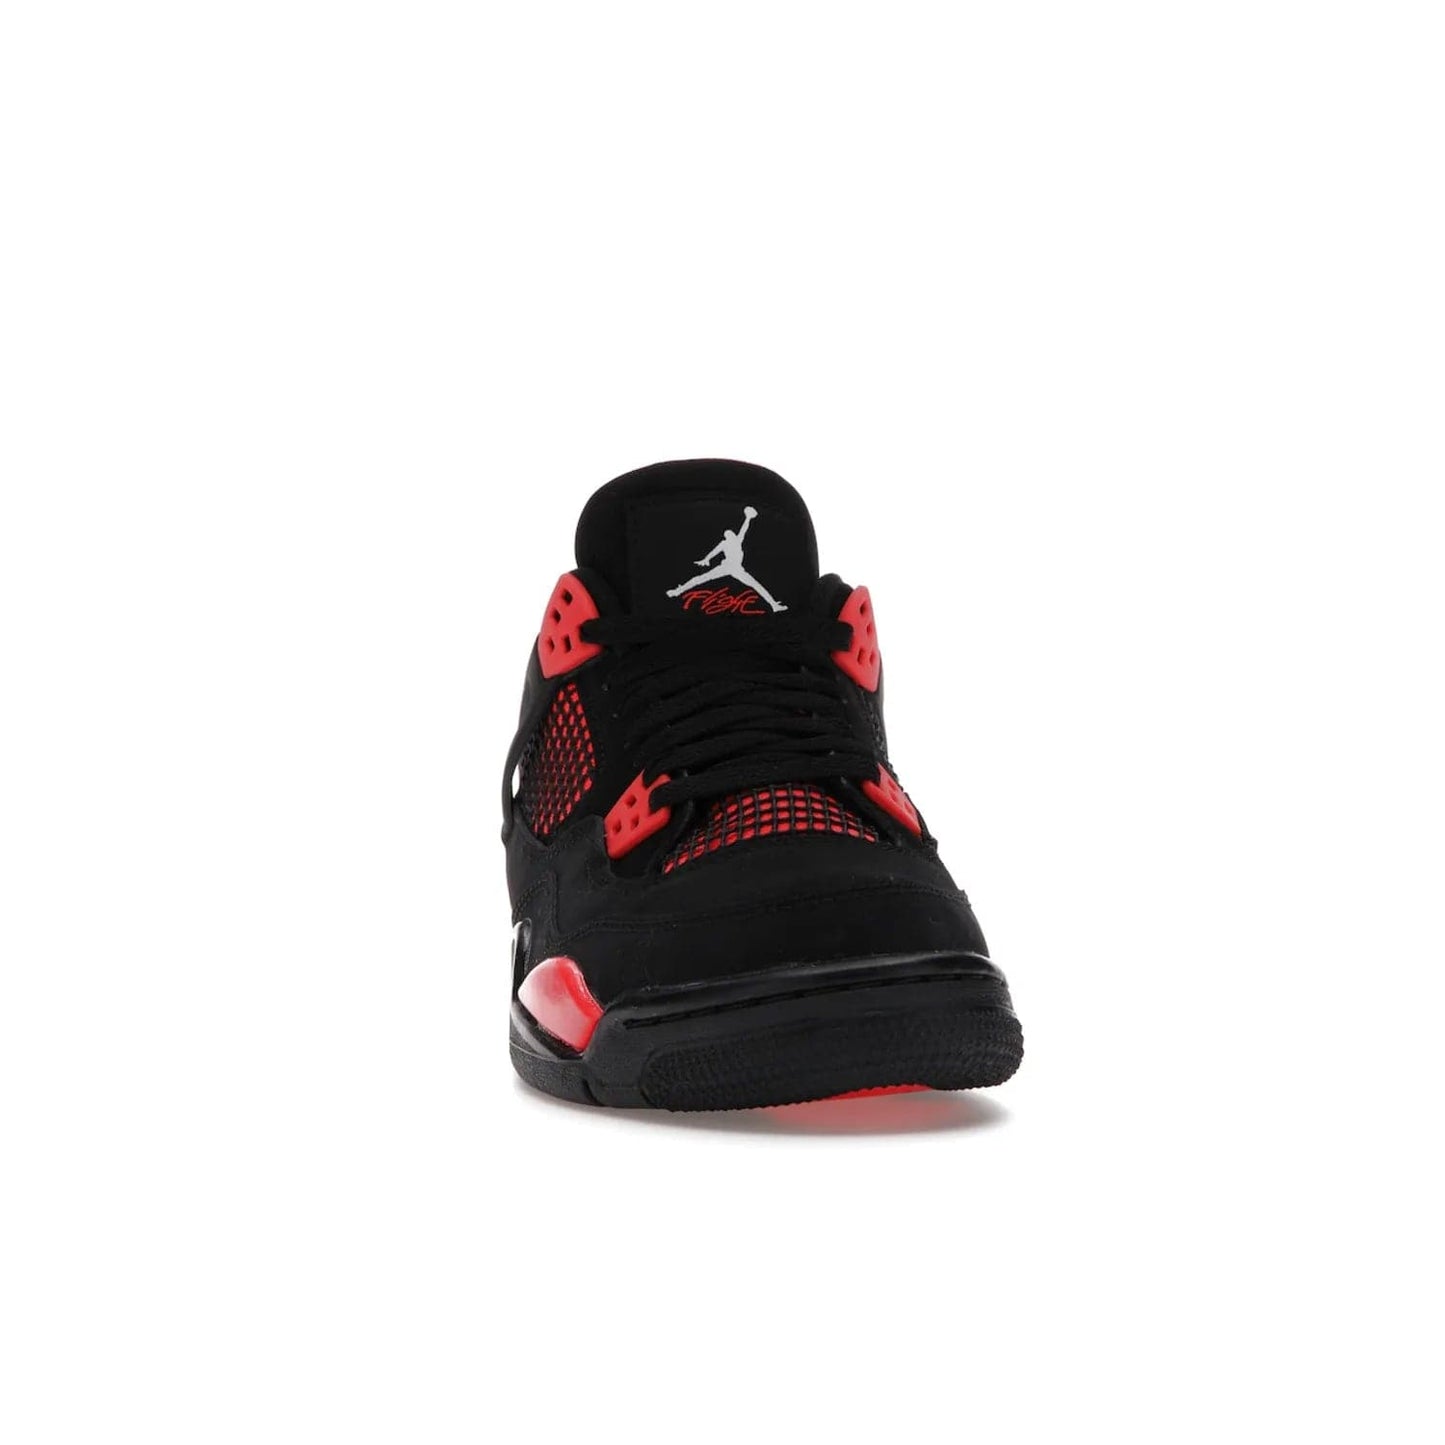 Jordan 4 Retro Red Thunder (GS) - Image 9 - Only at www.BallersClubKickz.com - The Air Jordan 4 Retro Red Thunder GS features a stylish black and crimson upper with a Jumpman logo. Athletic midsole with Air bubbles for cushioning and black rubber outsole with iconic motif complete this classic sneaker.